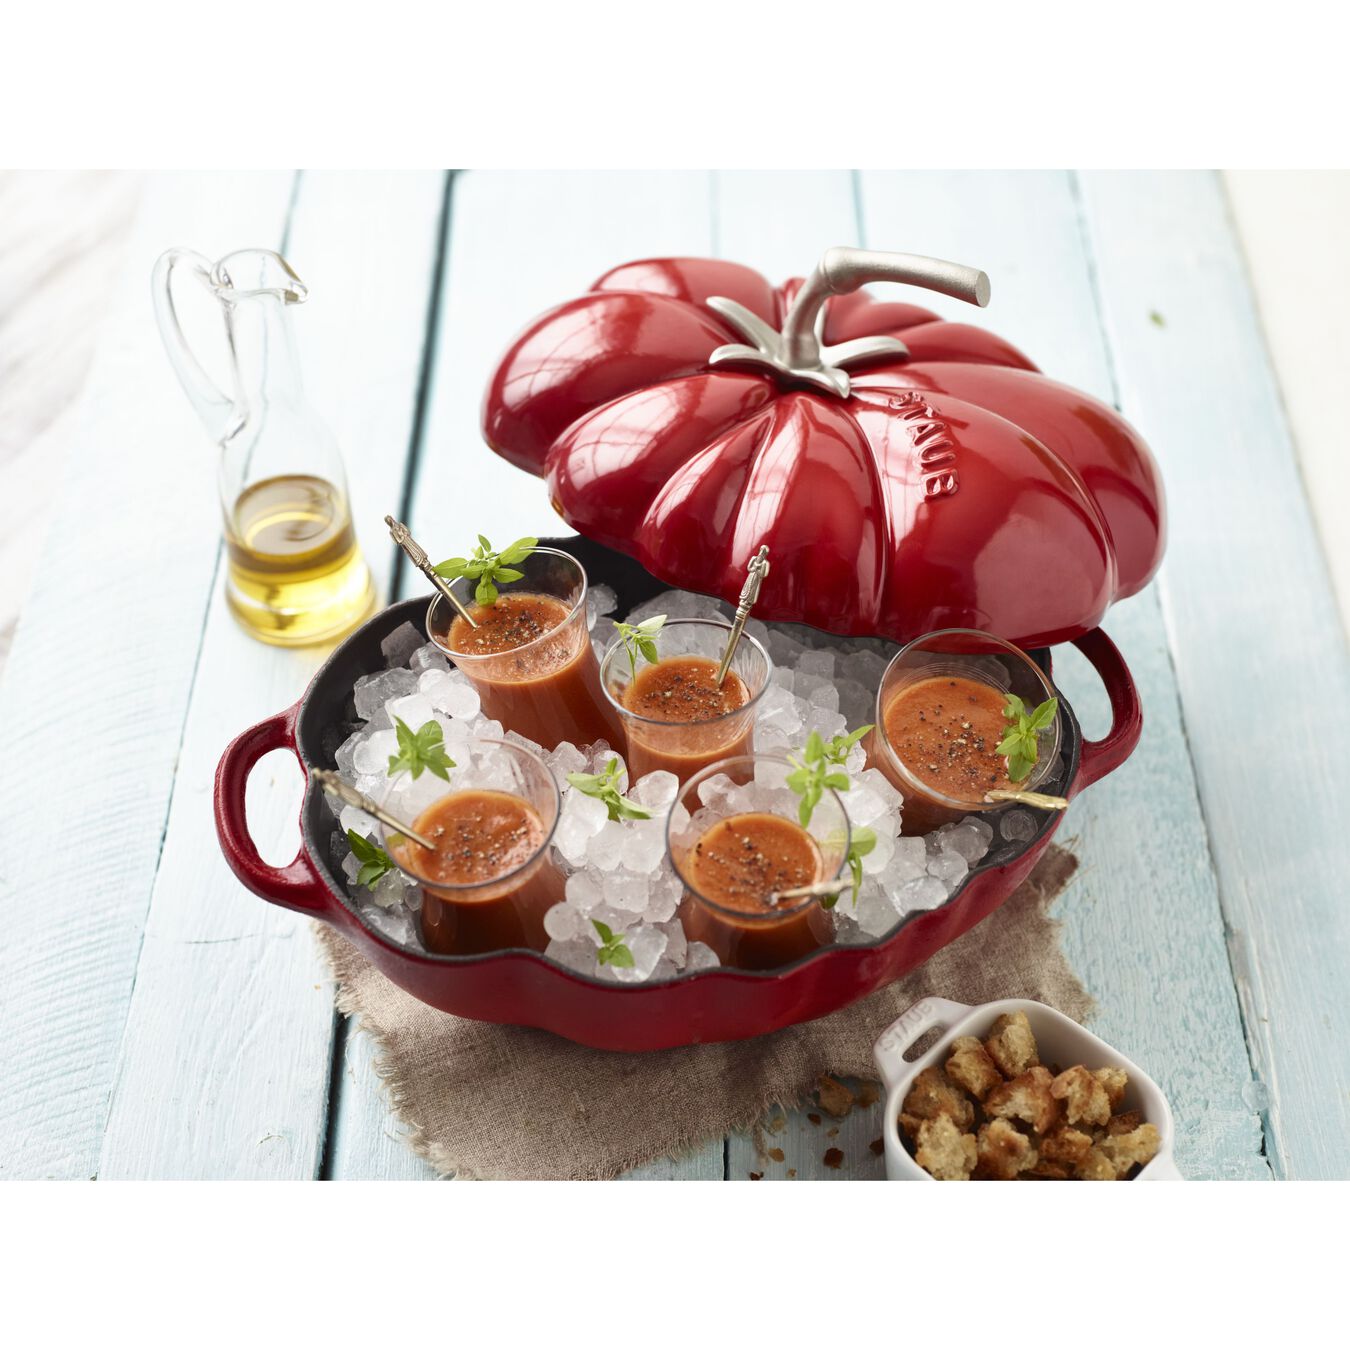 Cocotte 25 cm, Tomate, Kirsch-Rot, Gusseisen,,large 3